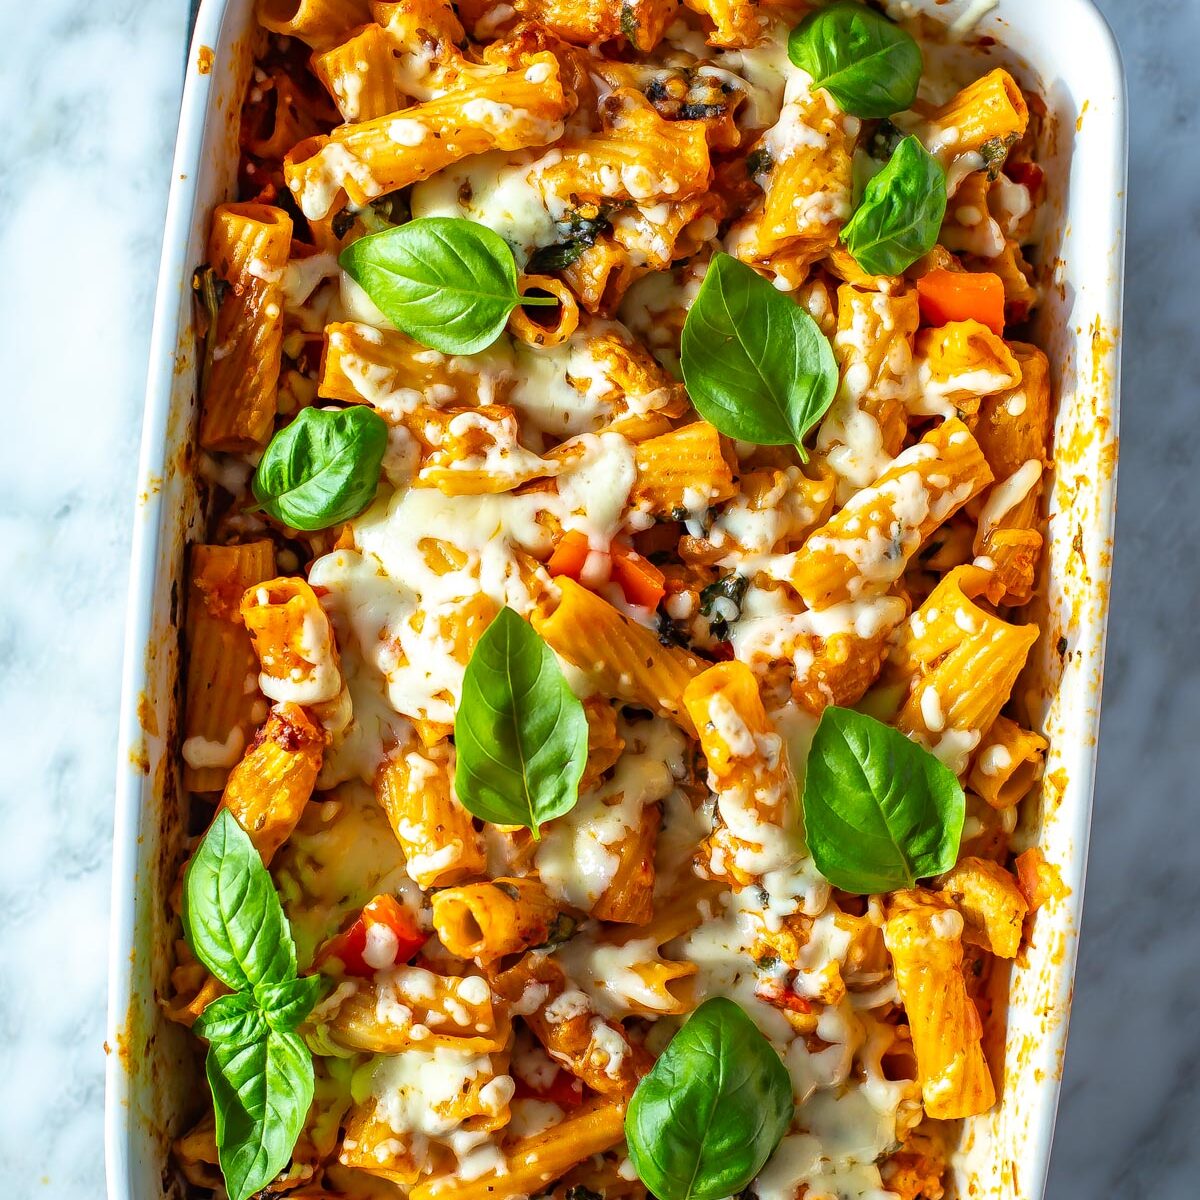 Chicken pasta bake in a a large casserole dish.